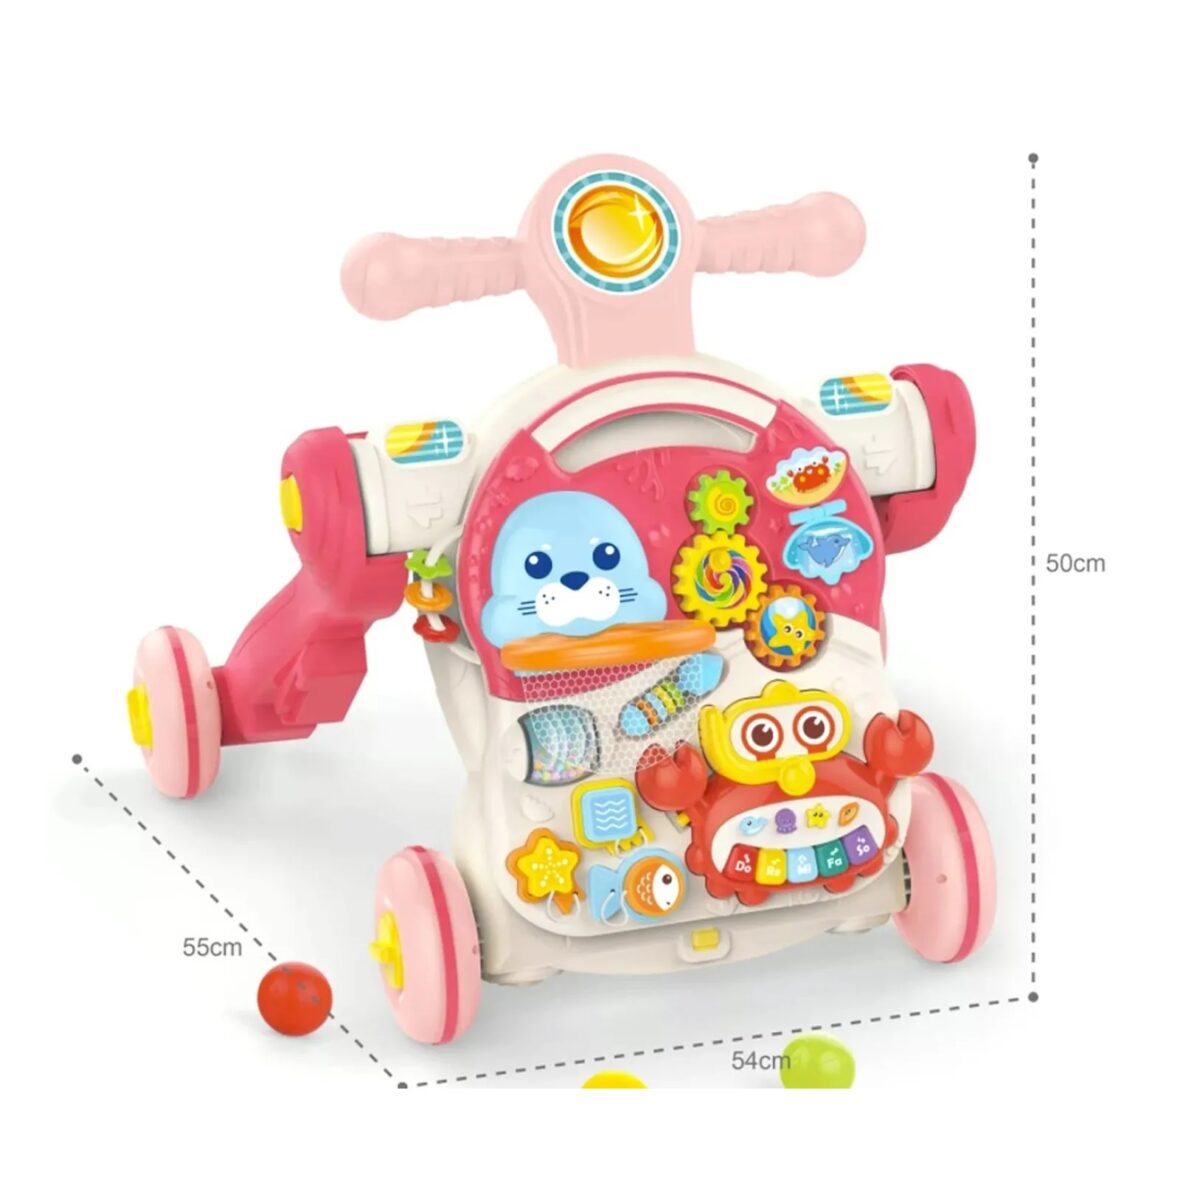 Multi-function Baby Walker 4in1 with Music- Trendy Design – Pink